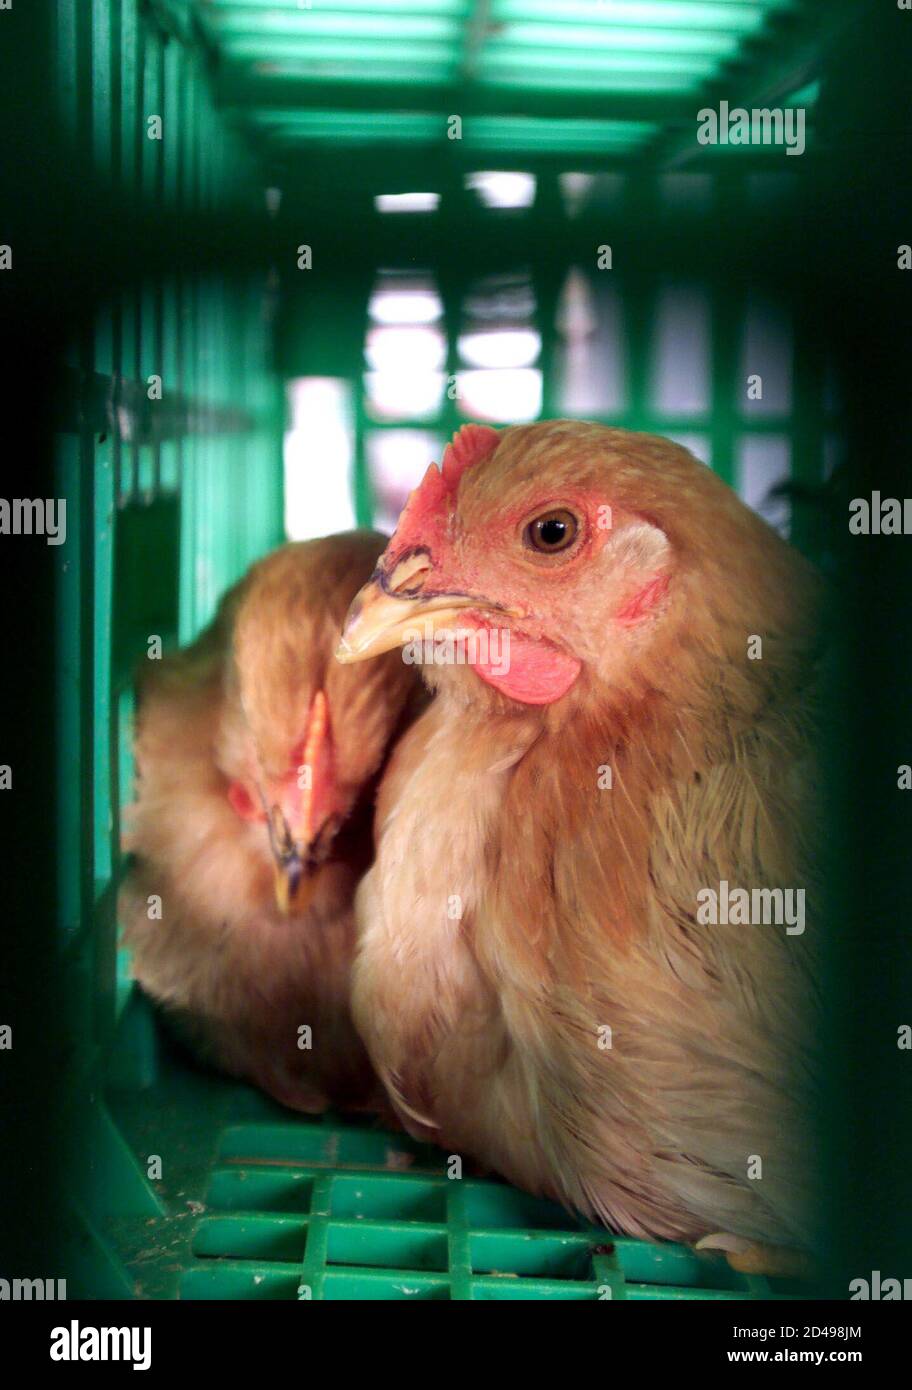 Chickens sit in a cage prior to being slaughtered in Hong Kong May 19, 2001. Hong Kong continues to kill all of its 1.2 million live poultry on Saturday to halt the spread of as avian bird flu. The government effort was designed to stop the strain from mixing with other viruses which may harm humans. The poultry trade is expected to receive compensation totalling HK$80 million (US$10.26 million) from the government as a result of the ongoing effort to slaughter all poultry in Hong Kong. Stock Photo